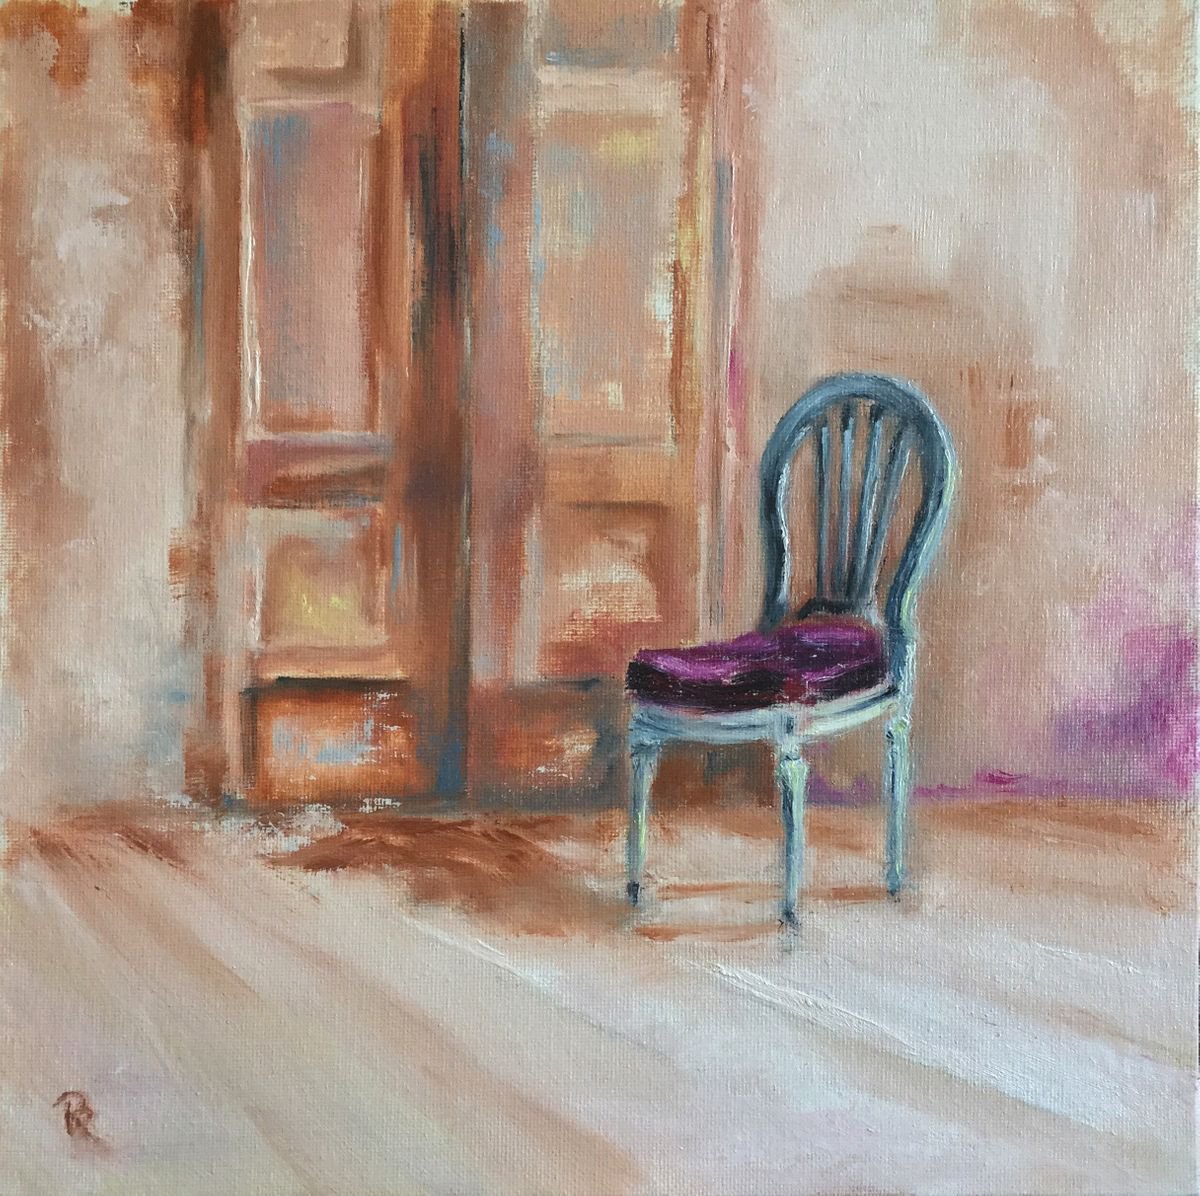 Untitled - with Chair II by Rebecca Pells